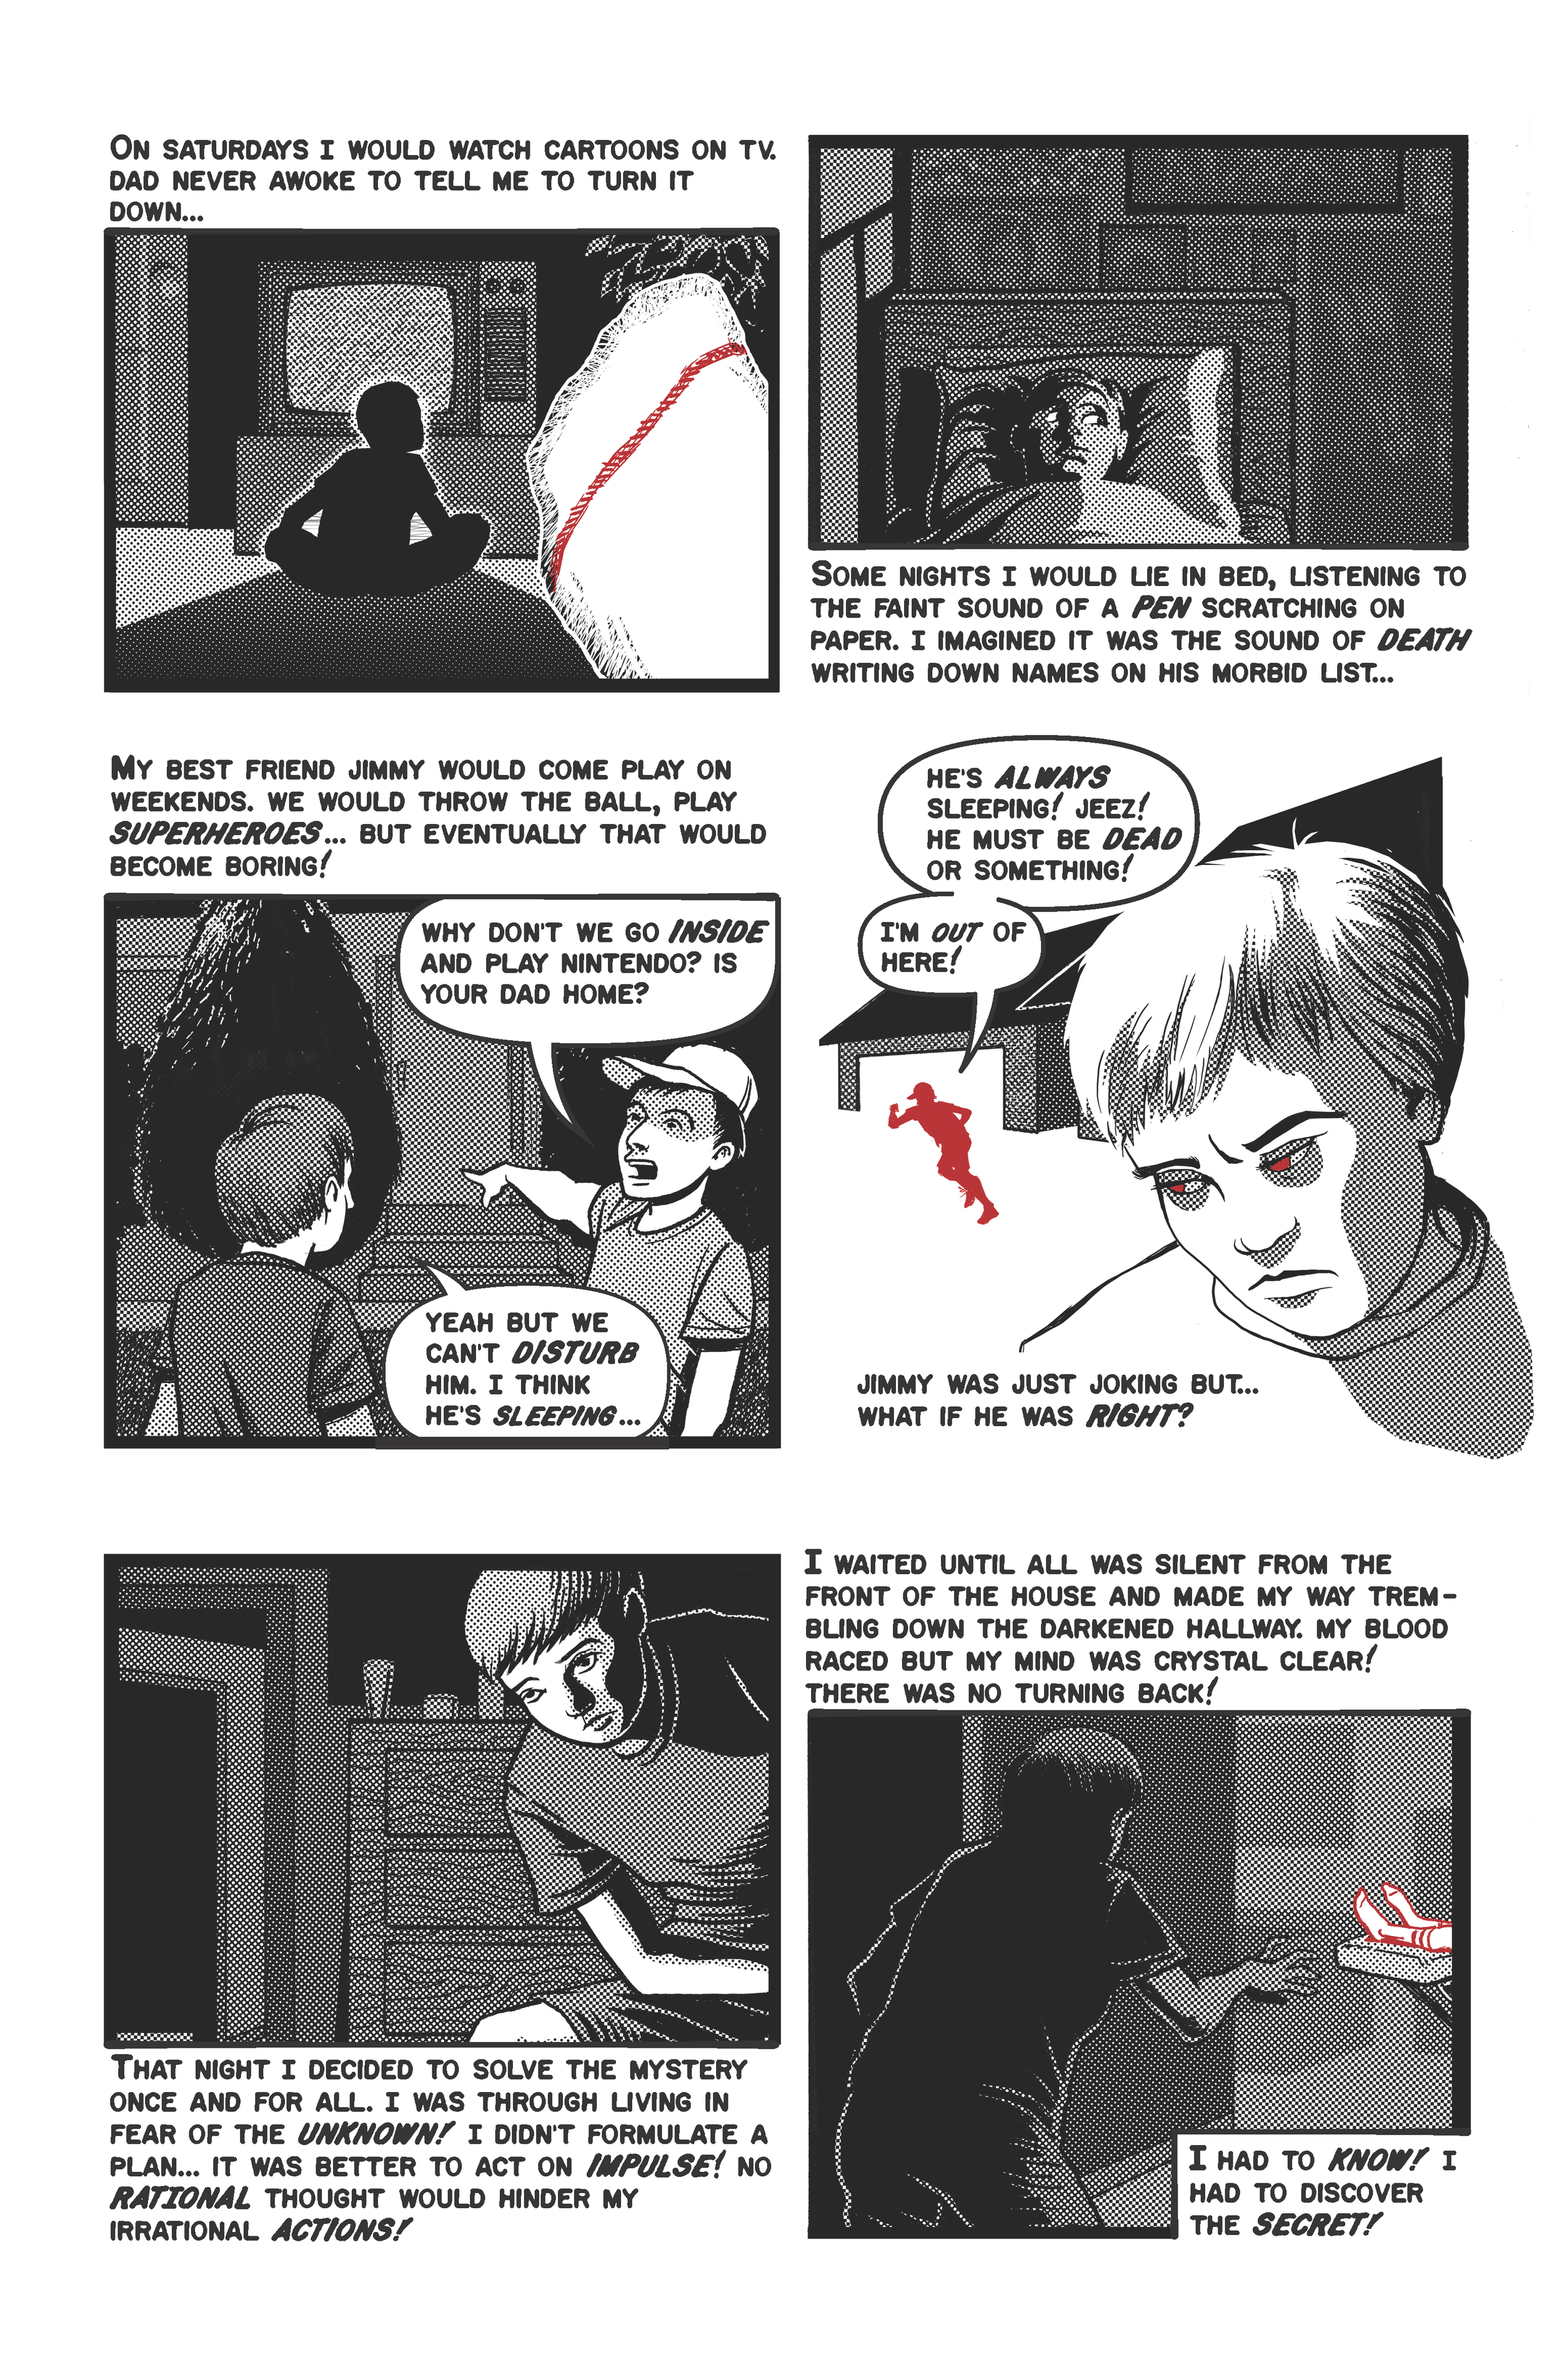 GK_MDD_Page_2.png